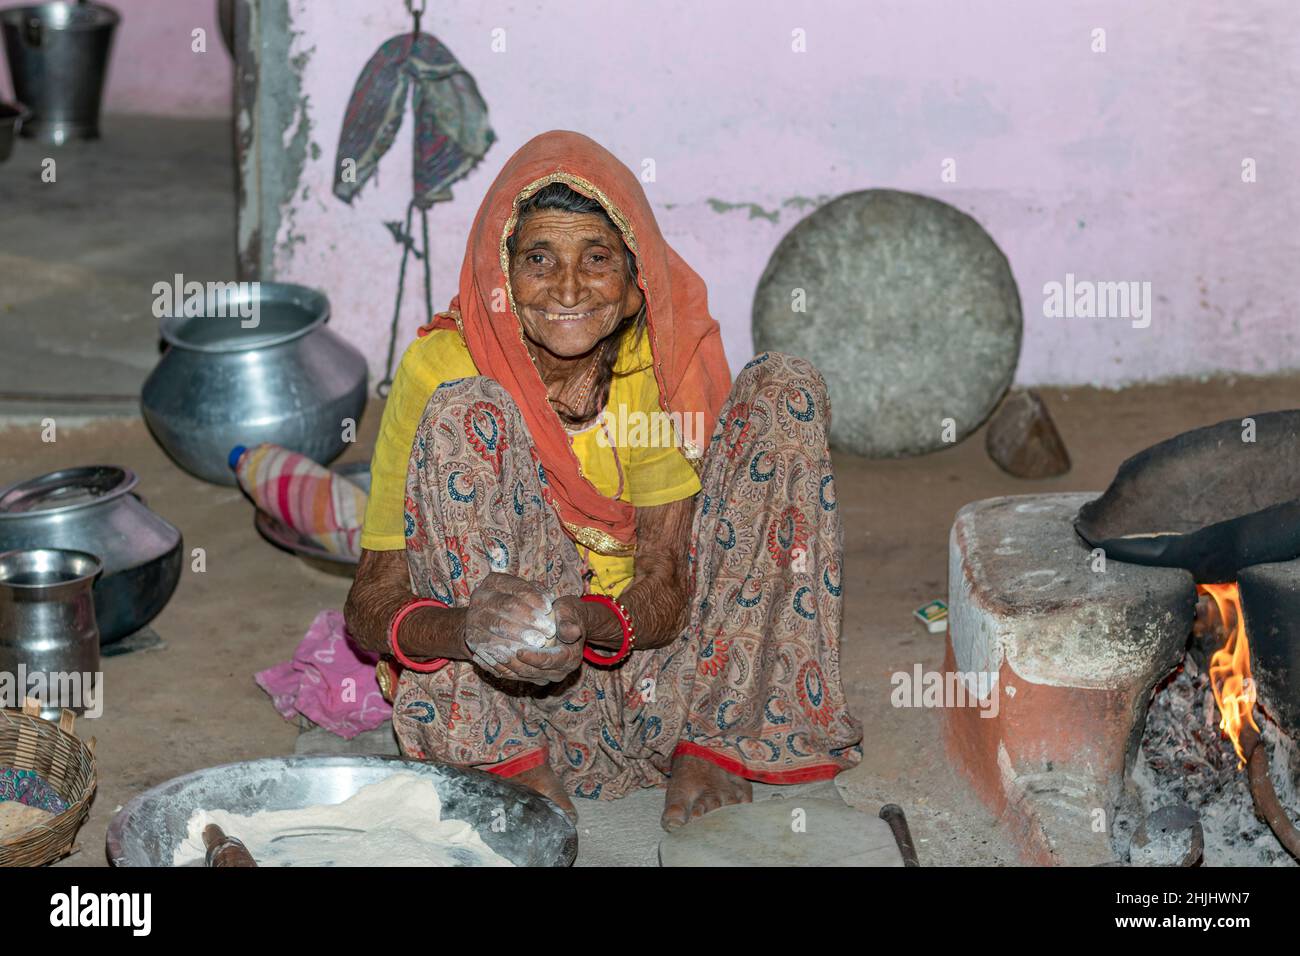 Grandmother making and cooking fresh food in a rural village in a vintage kitchen using firewood in earthen chulhas. smile on face. Stock Photo